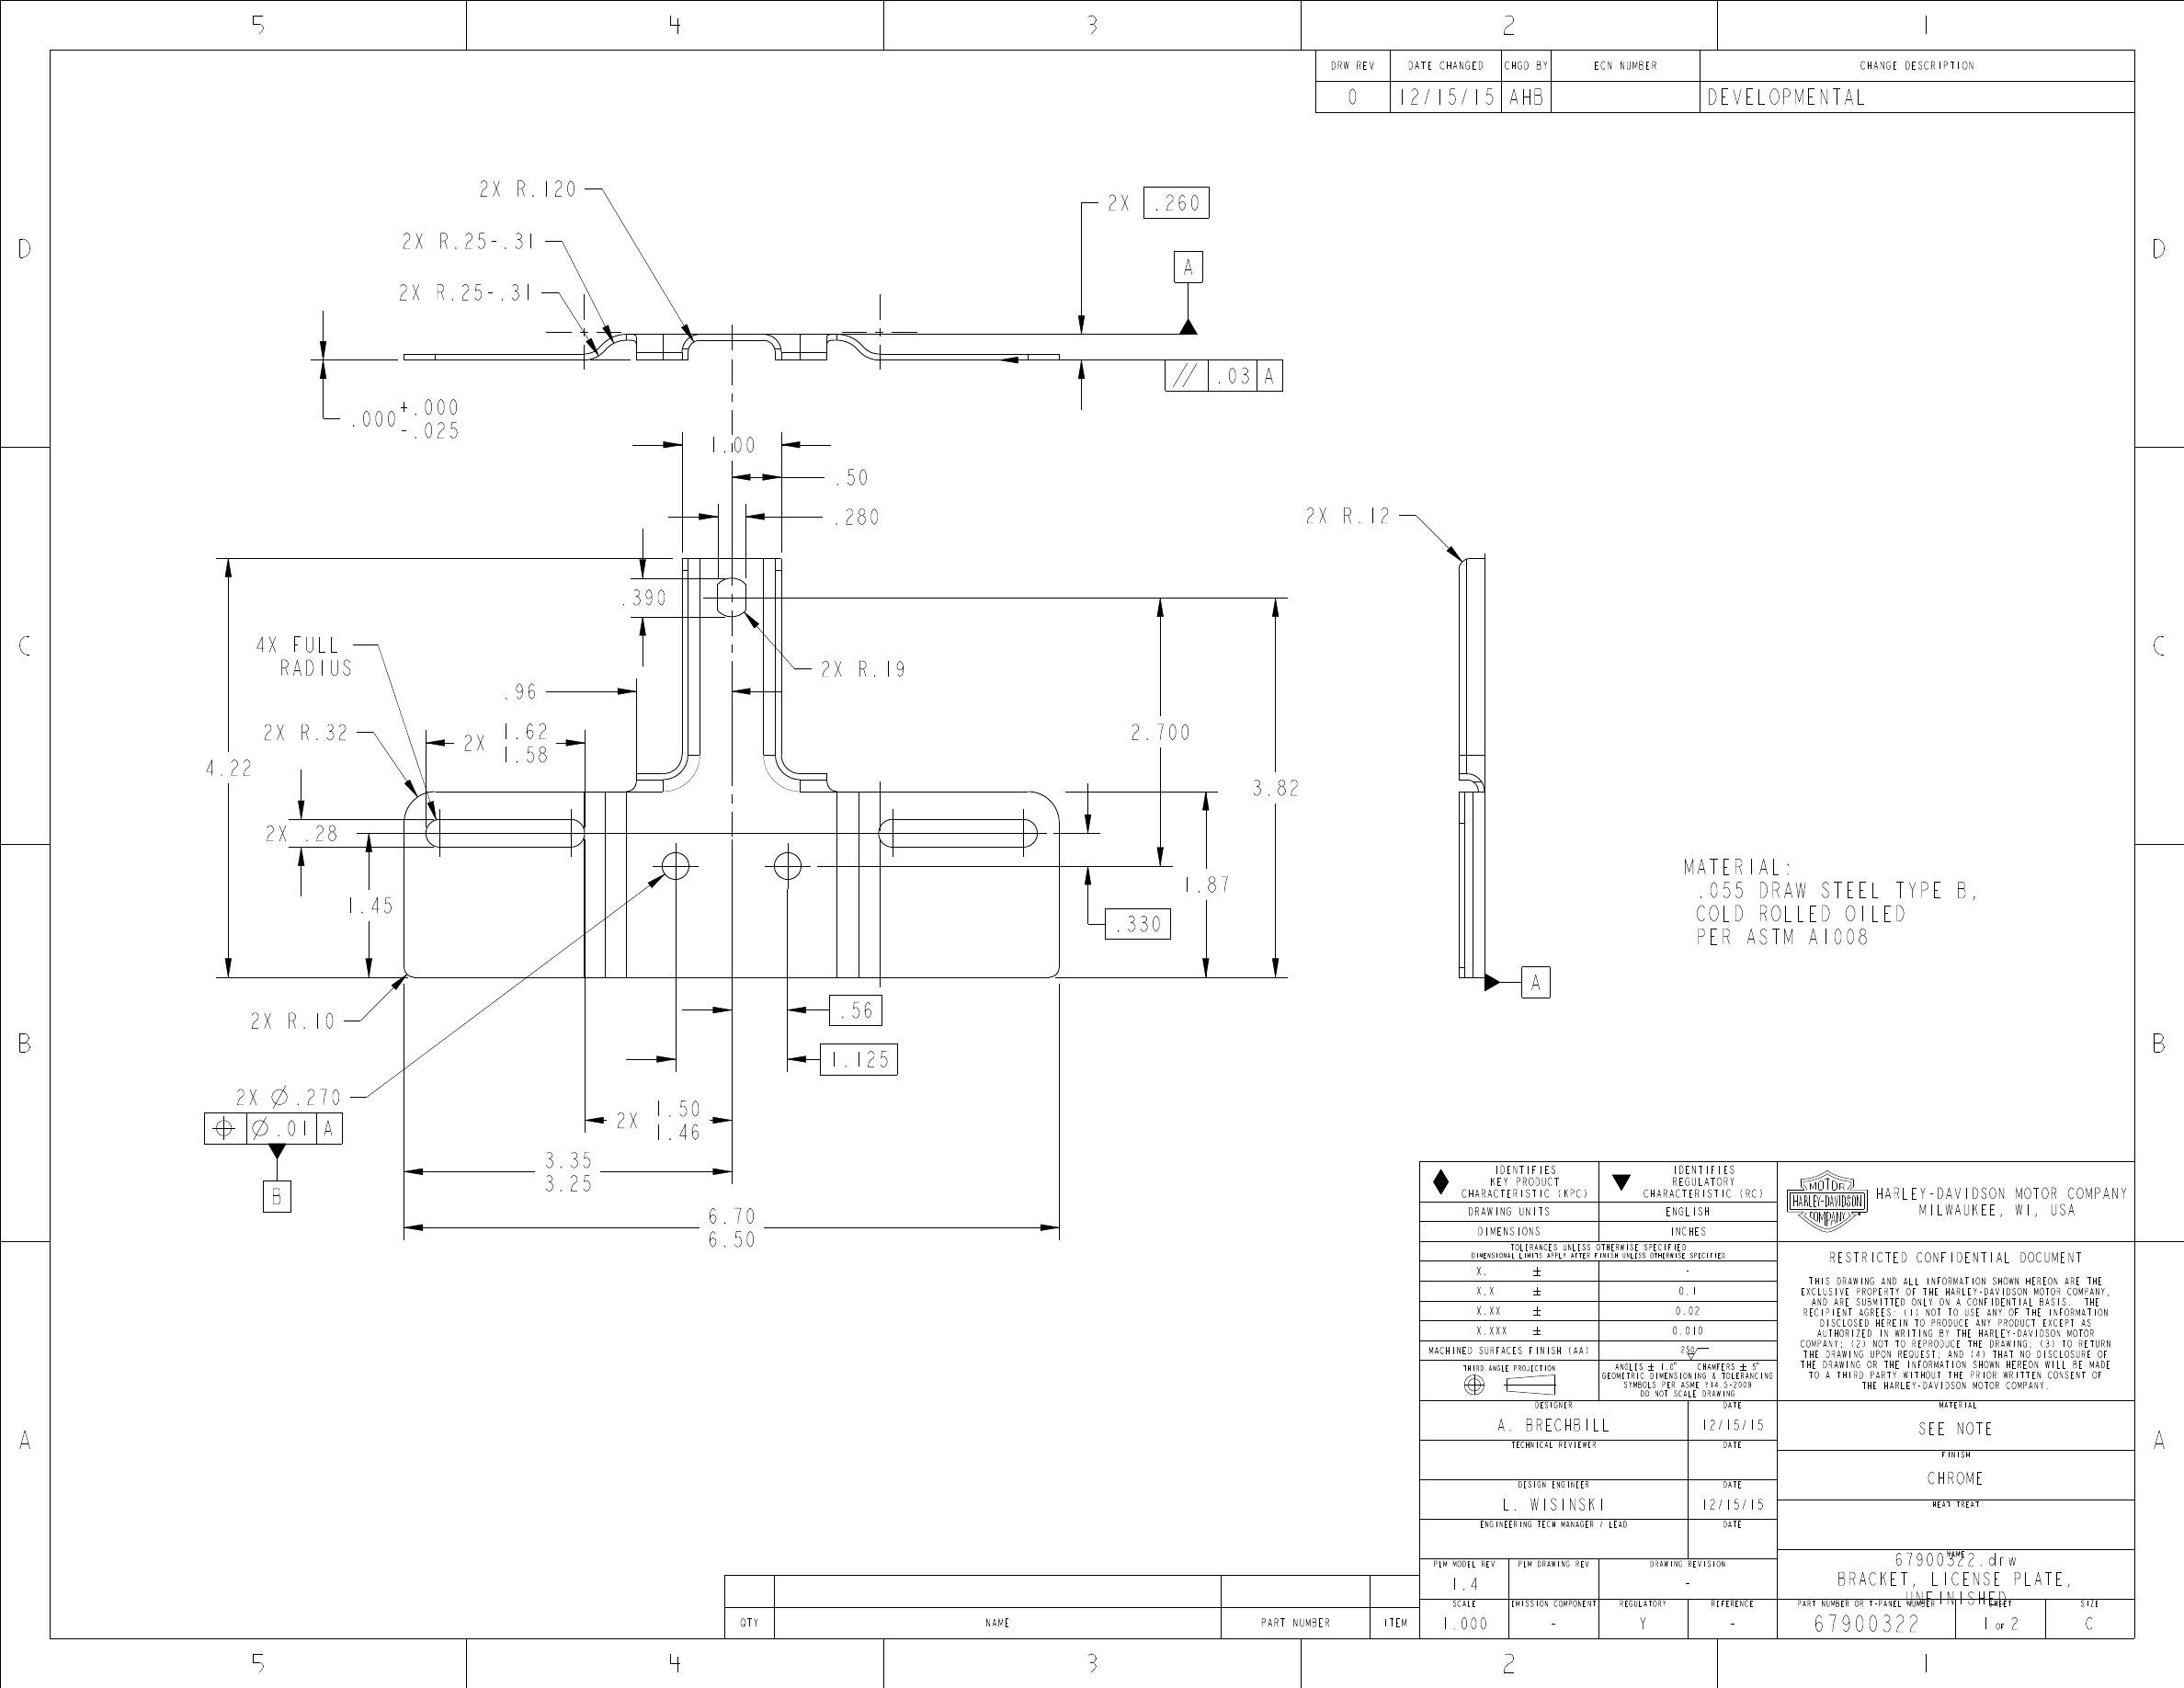 Stamping parts processing drawings